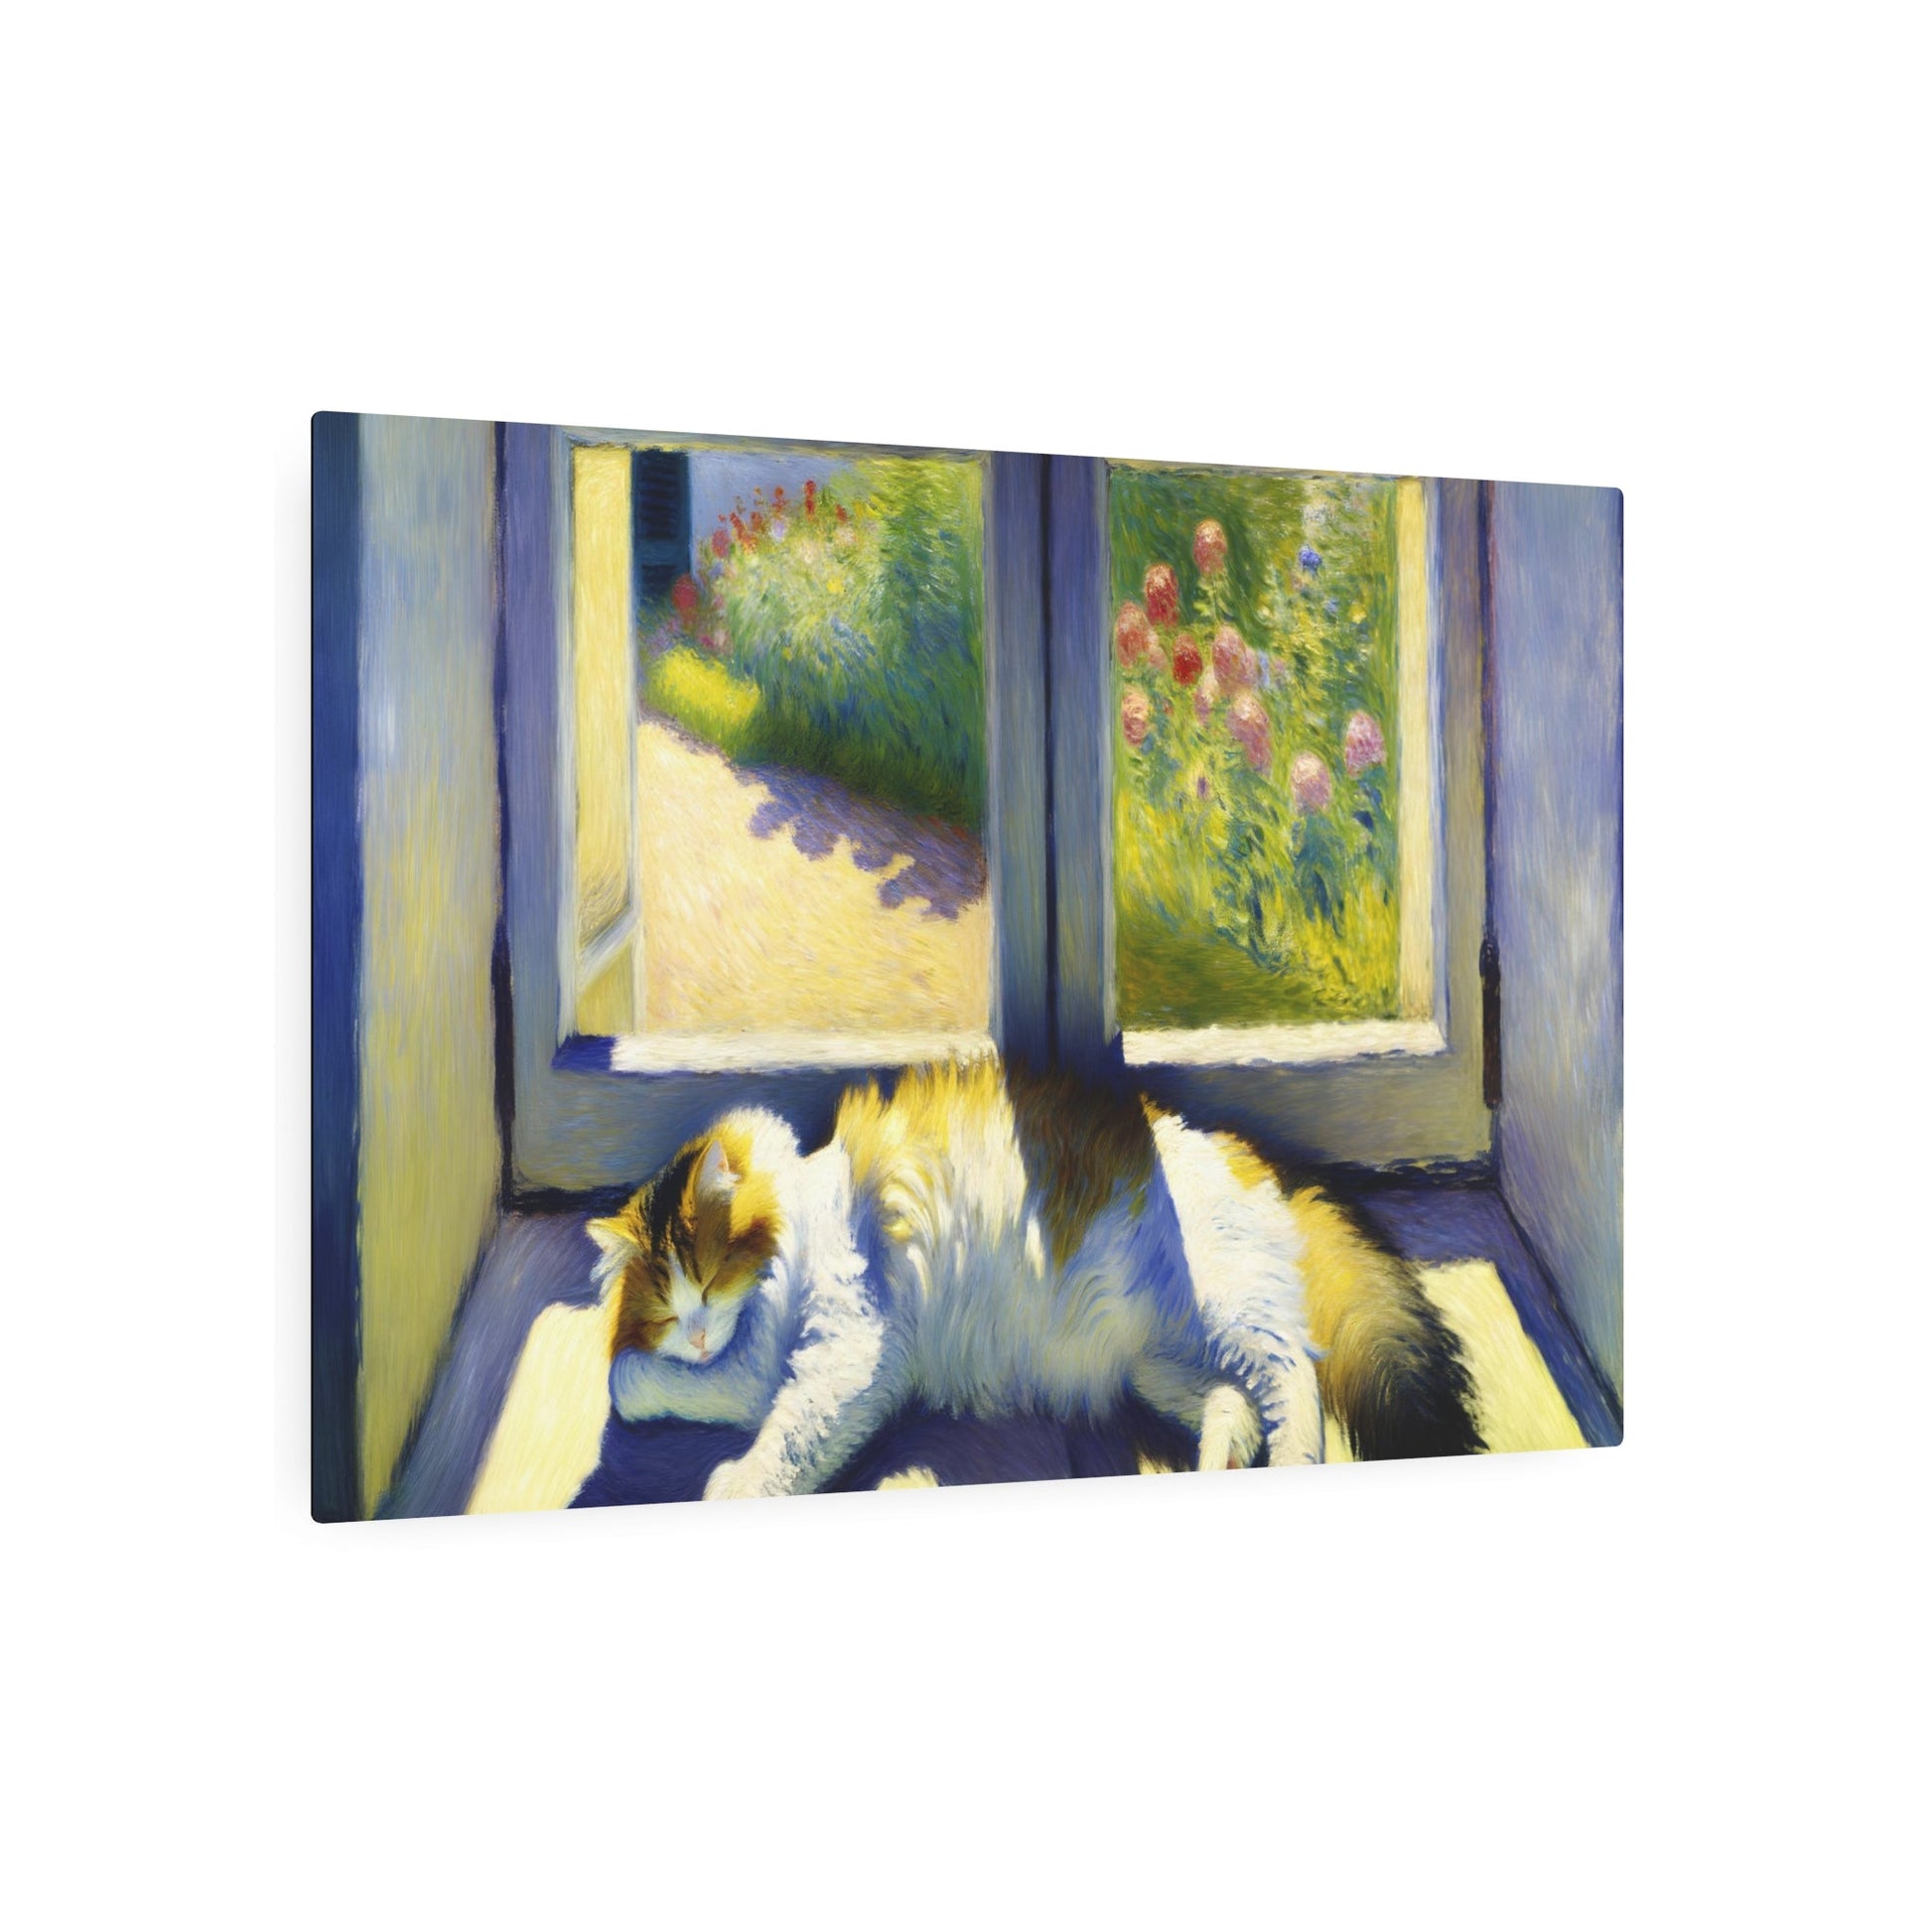 Metal Poster Art | "Impressionist Western Art: Sun-Drenched Cat Lounging on Windowsill Painting" - Metal Poster Art 36″ x 24″ (Horizontal) 0.12''